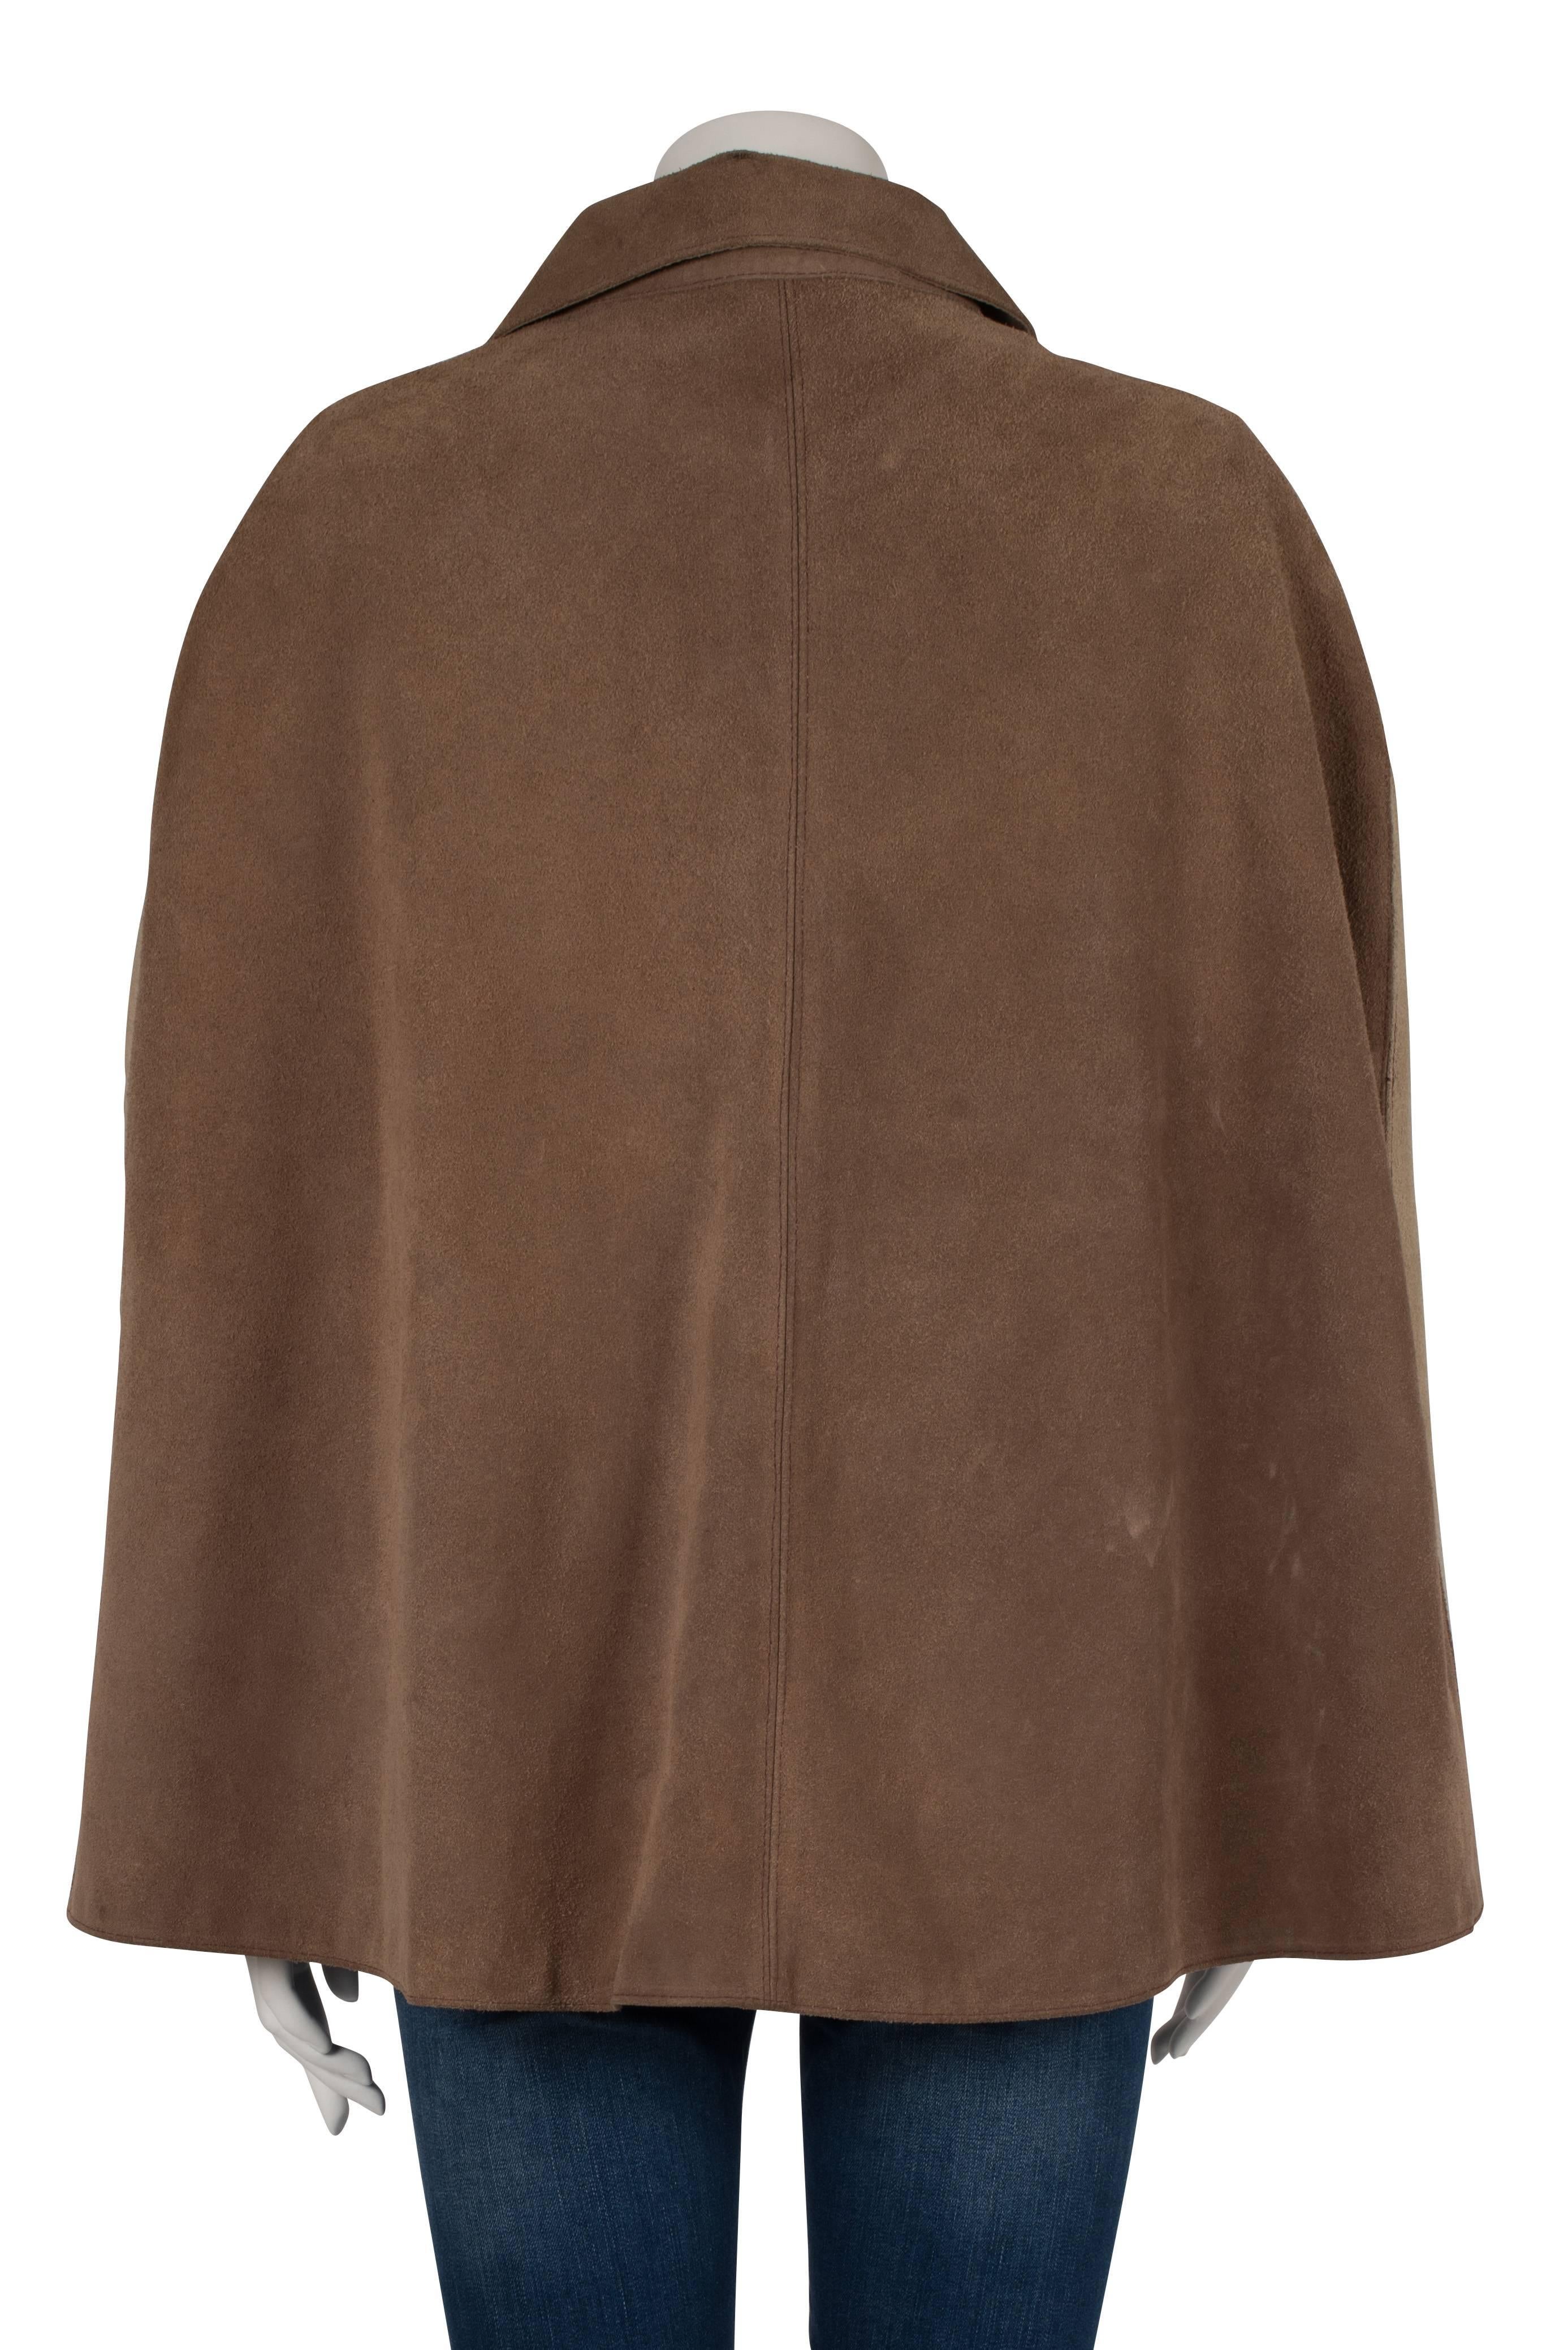 1970's Tan & Beige Suede Mexican Poncho Cape with Zip-Up Front For Sale 3